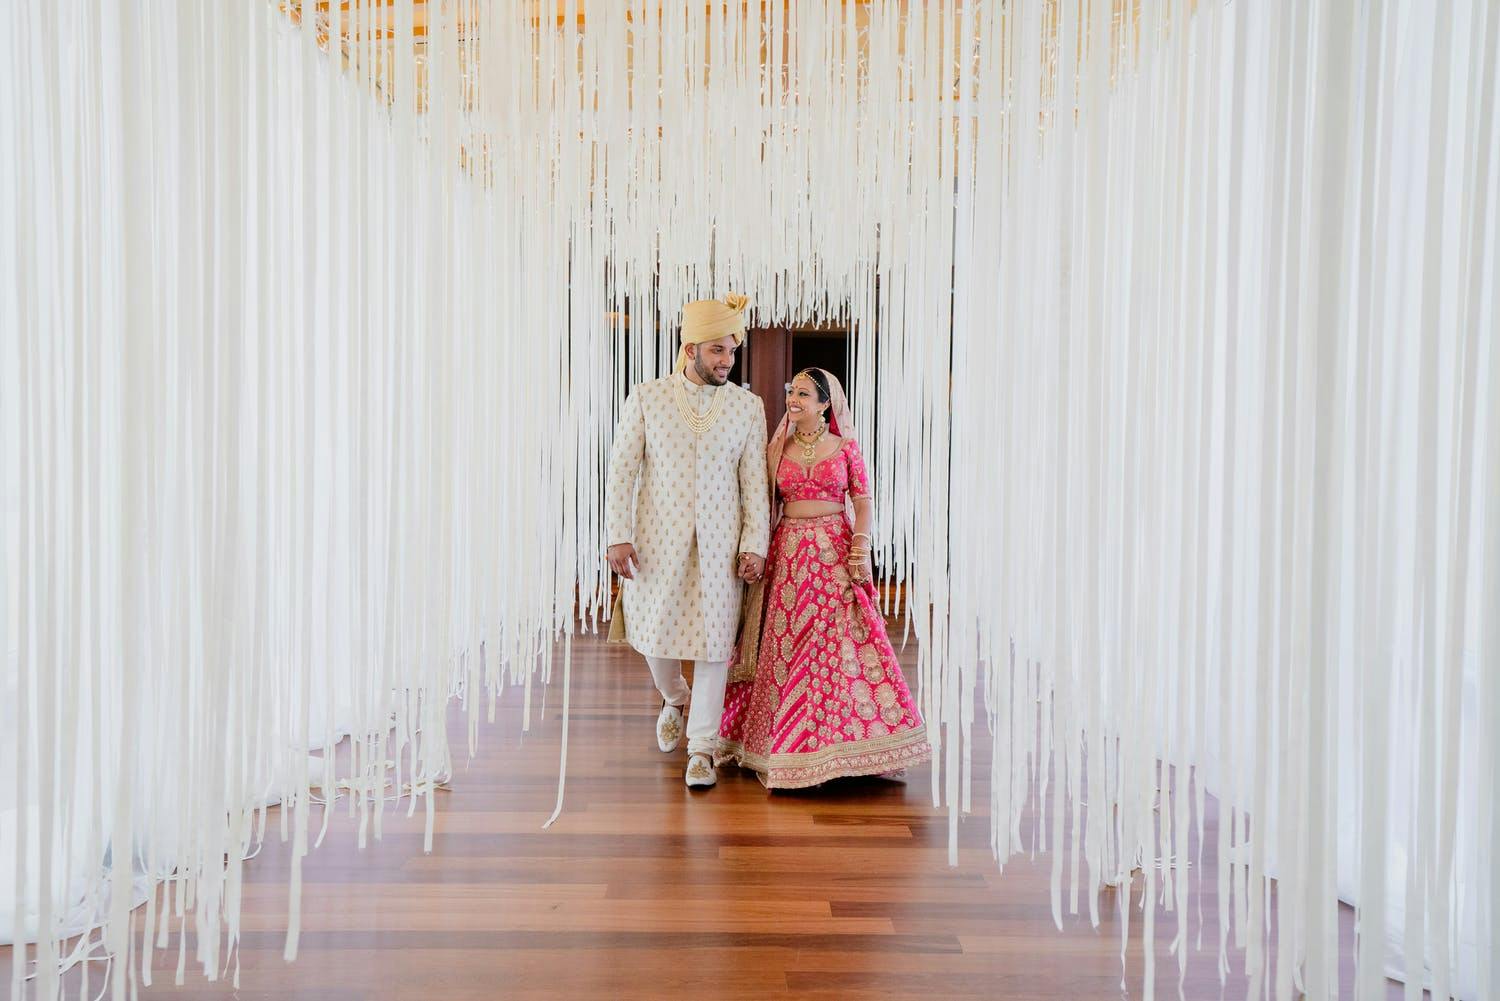 Bride and Groom Dressed in South Asian Wedding Attire Walk through White Fringe Corridor | PartySlate